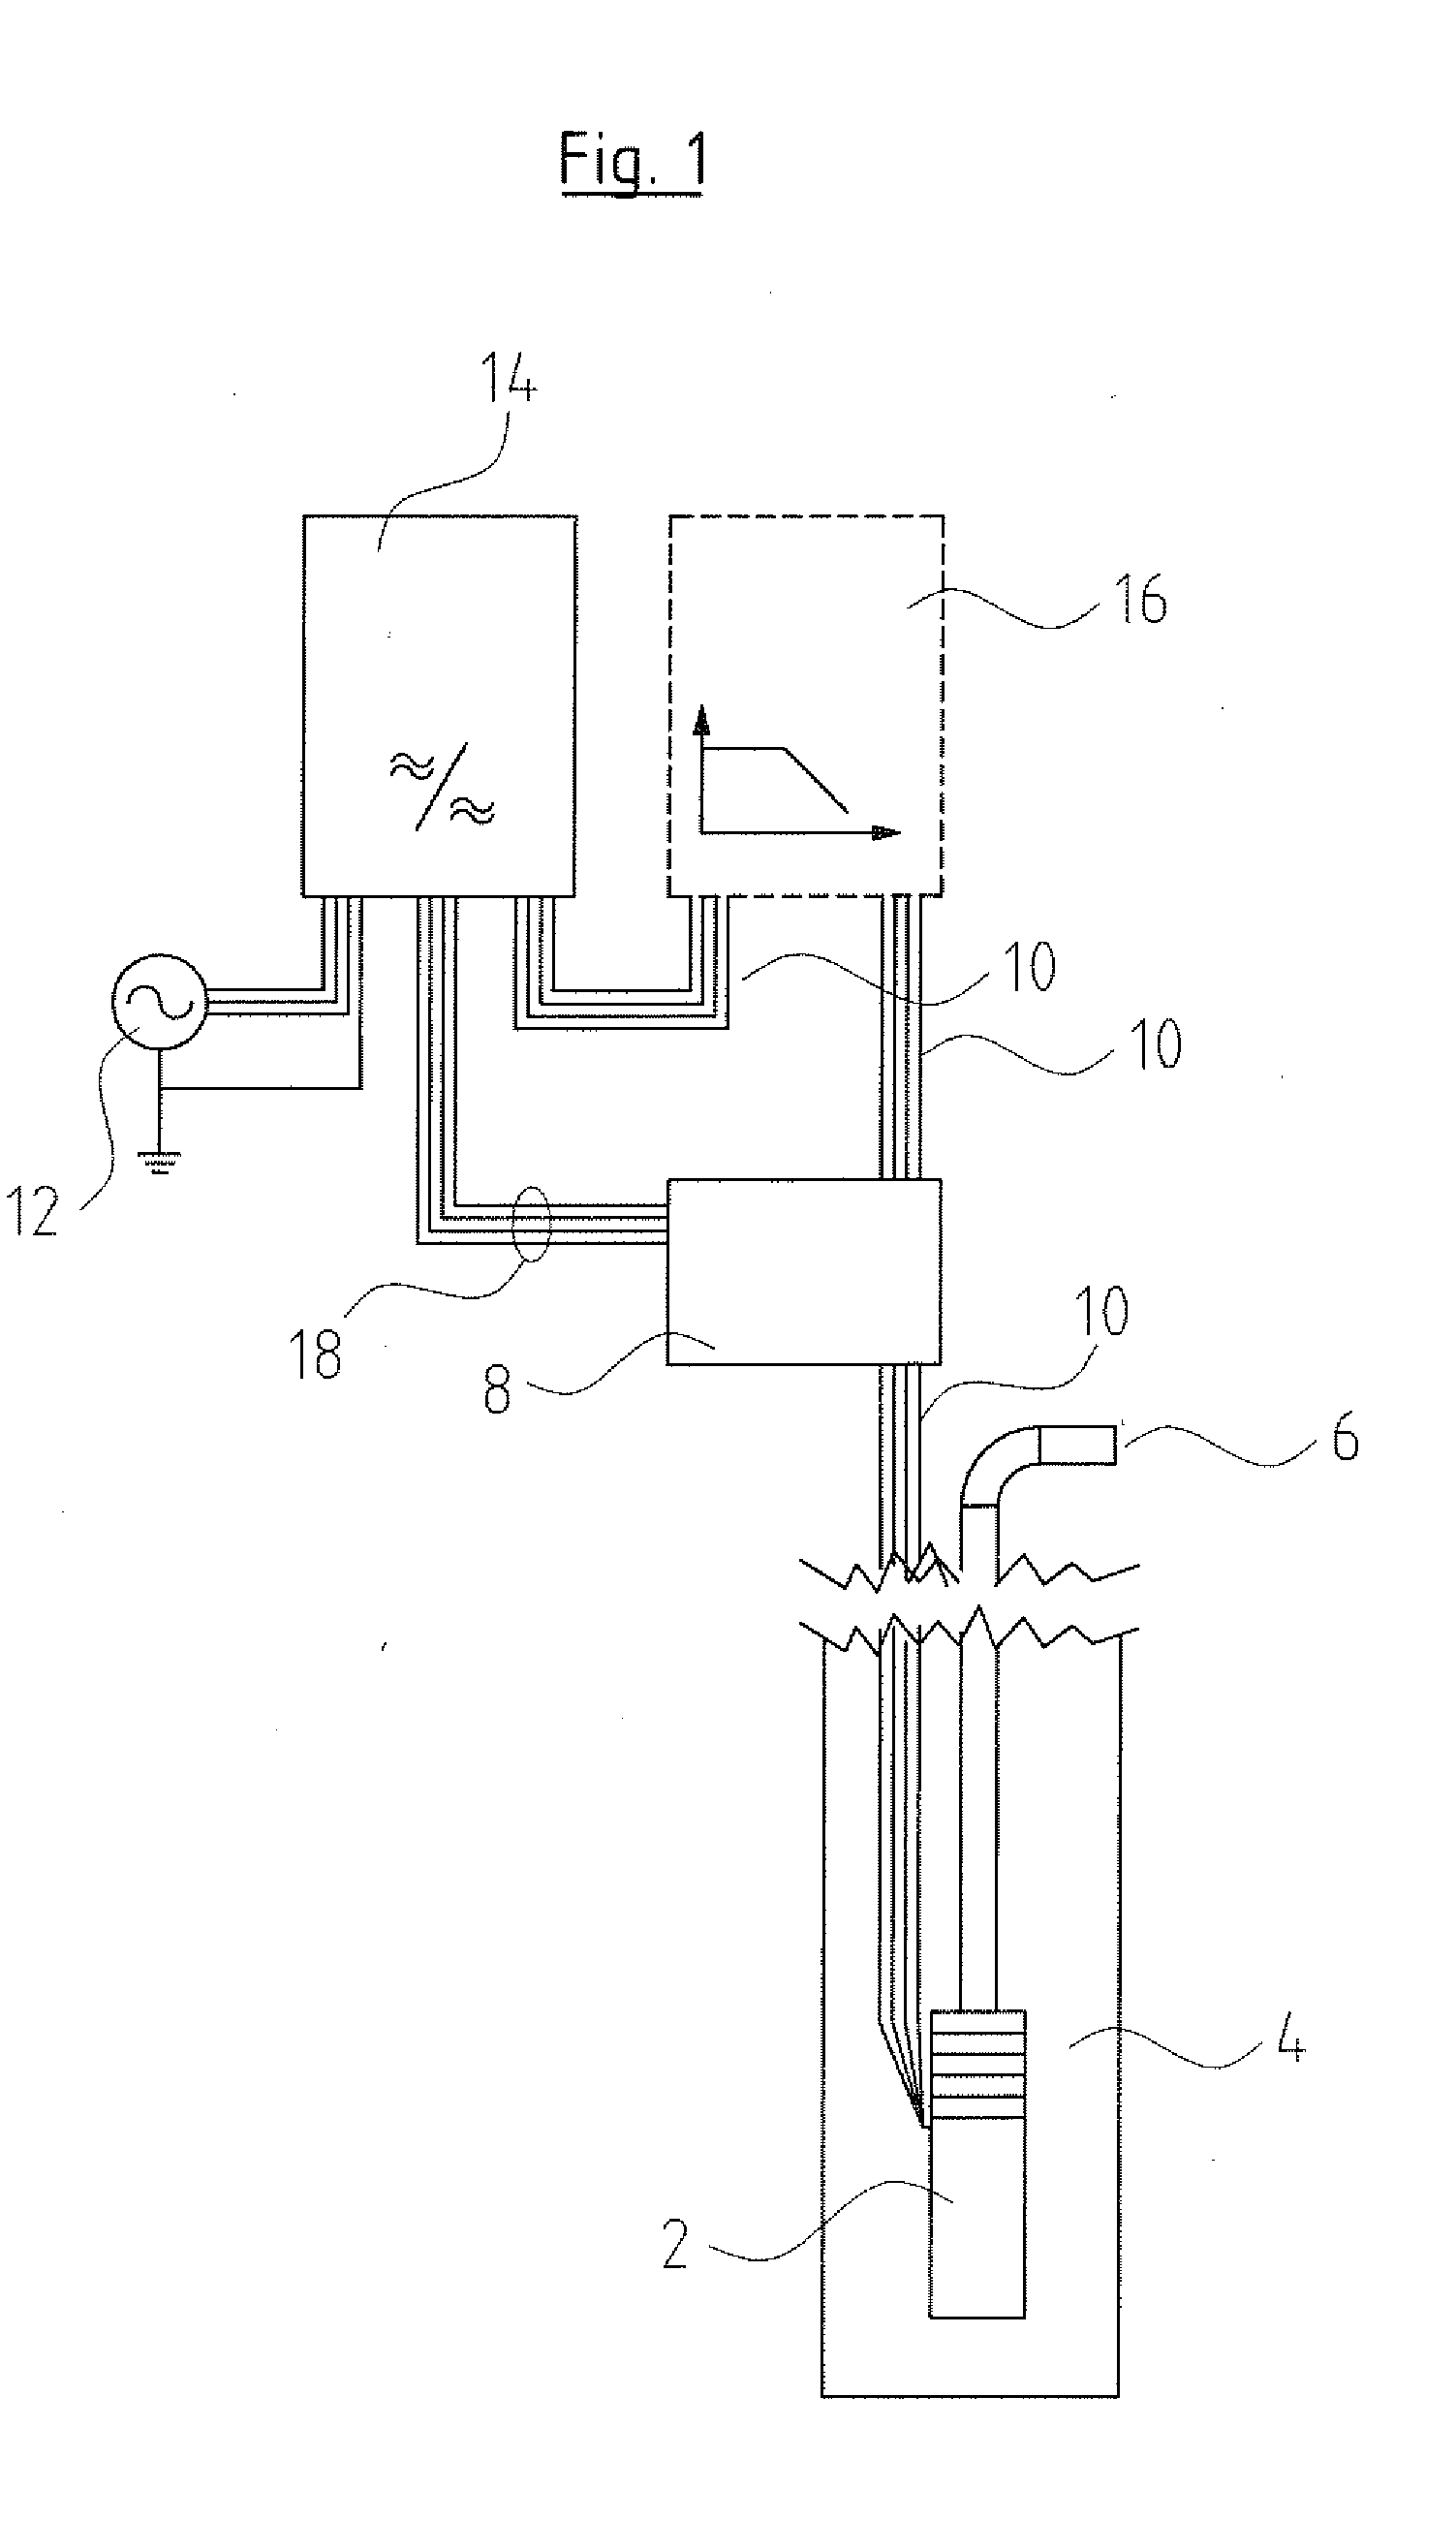 Method for data transmission between a pump assembly and a control device, as well as a correspondingly designed pump system